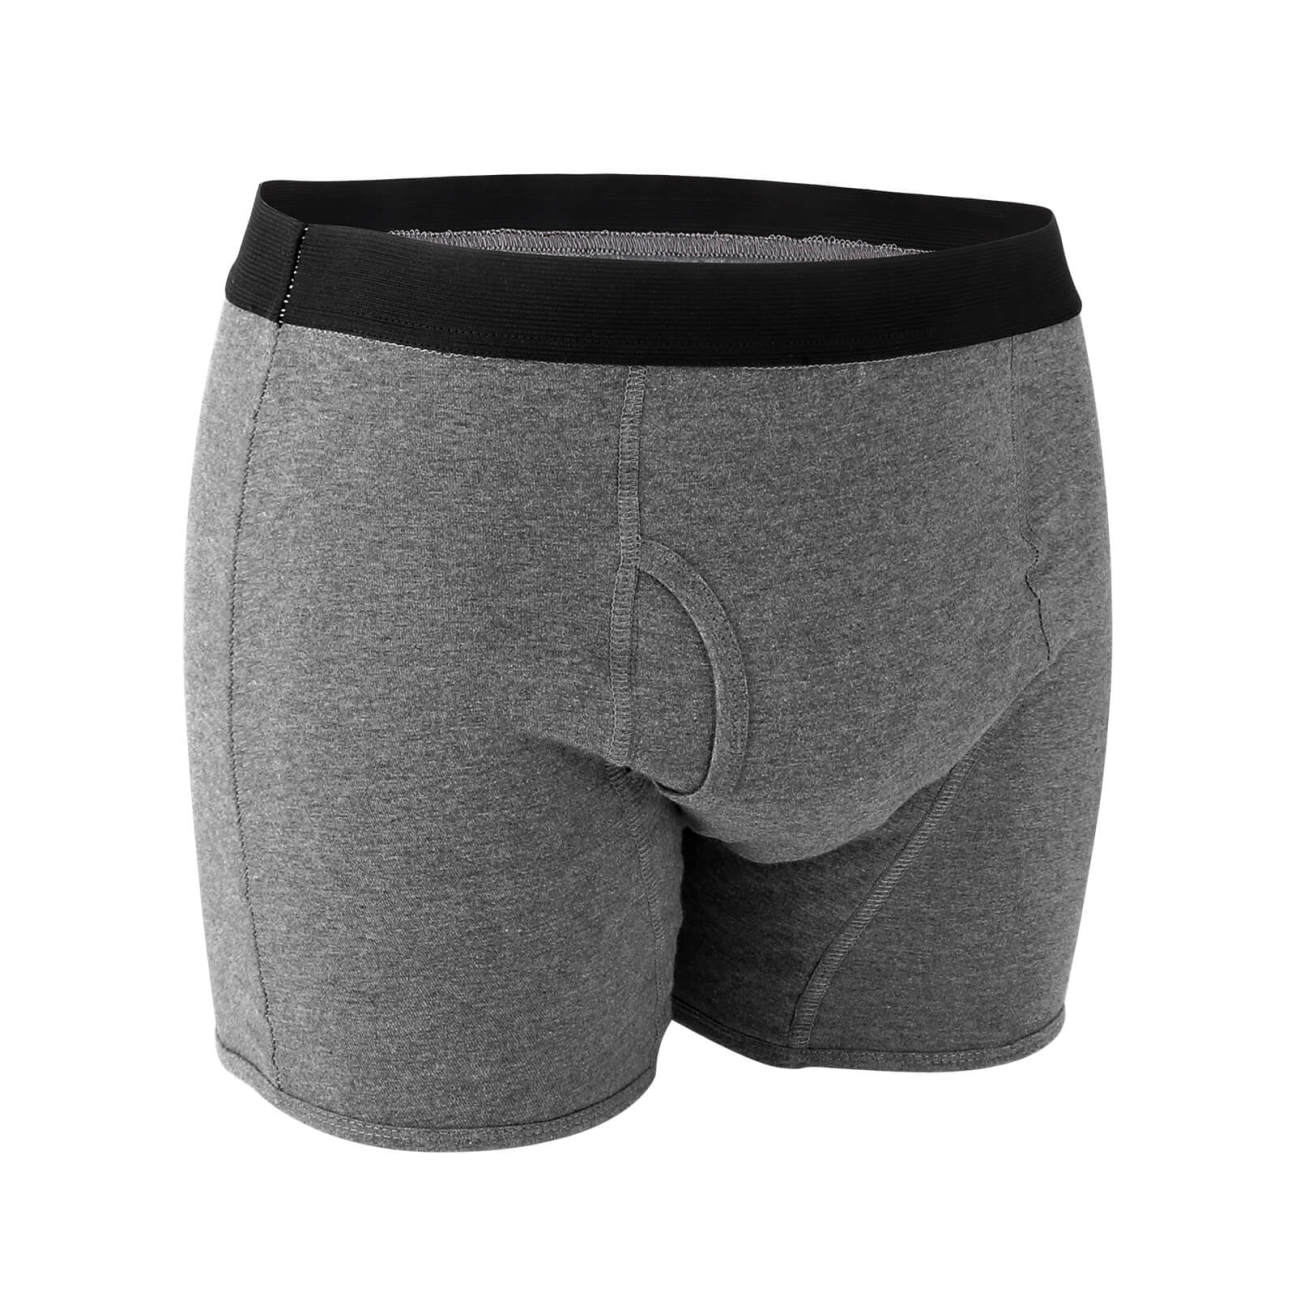 Mens Incontinence Boxers with Fly Overnight Moderate Absorbency Underwear